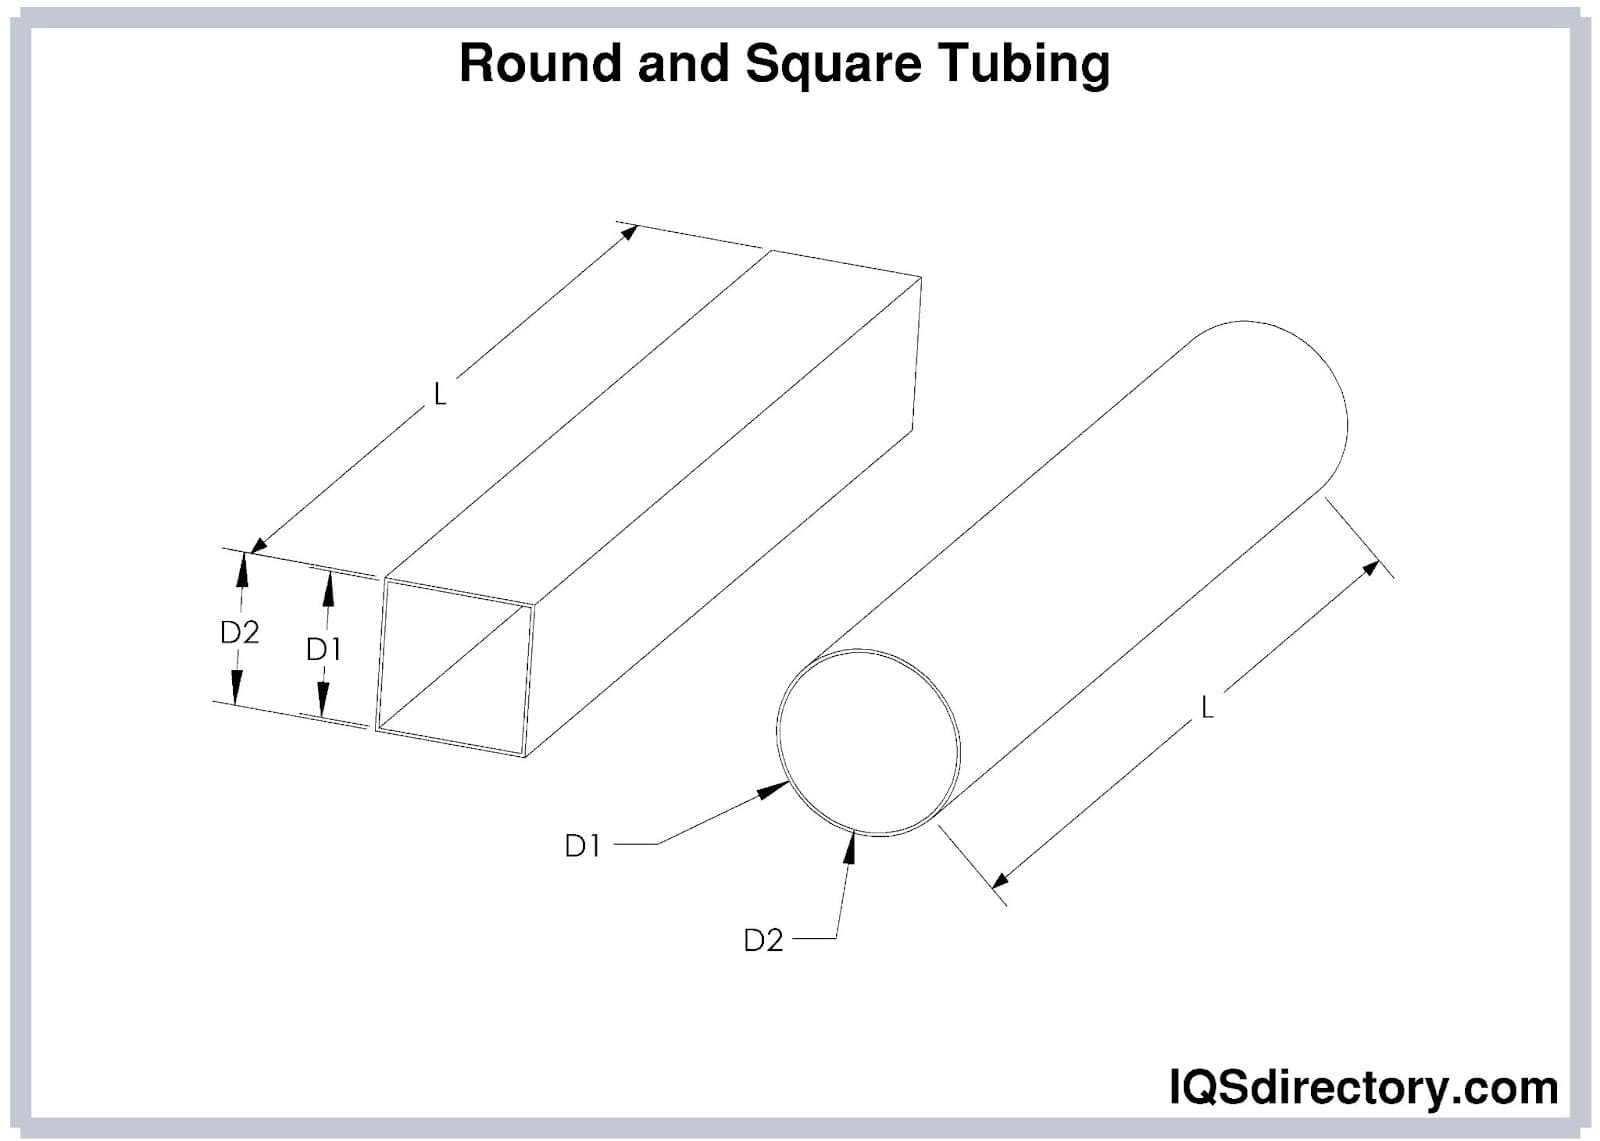 Round and Square Tubing